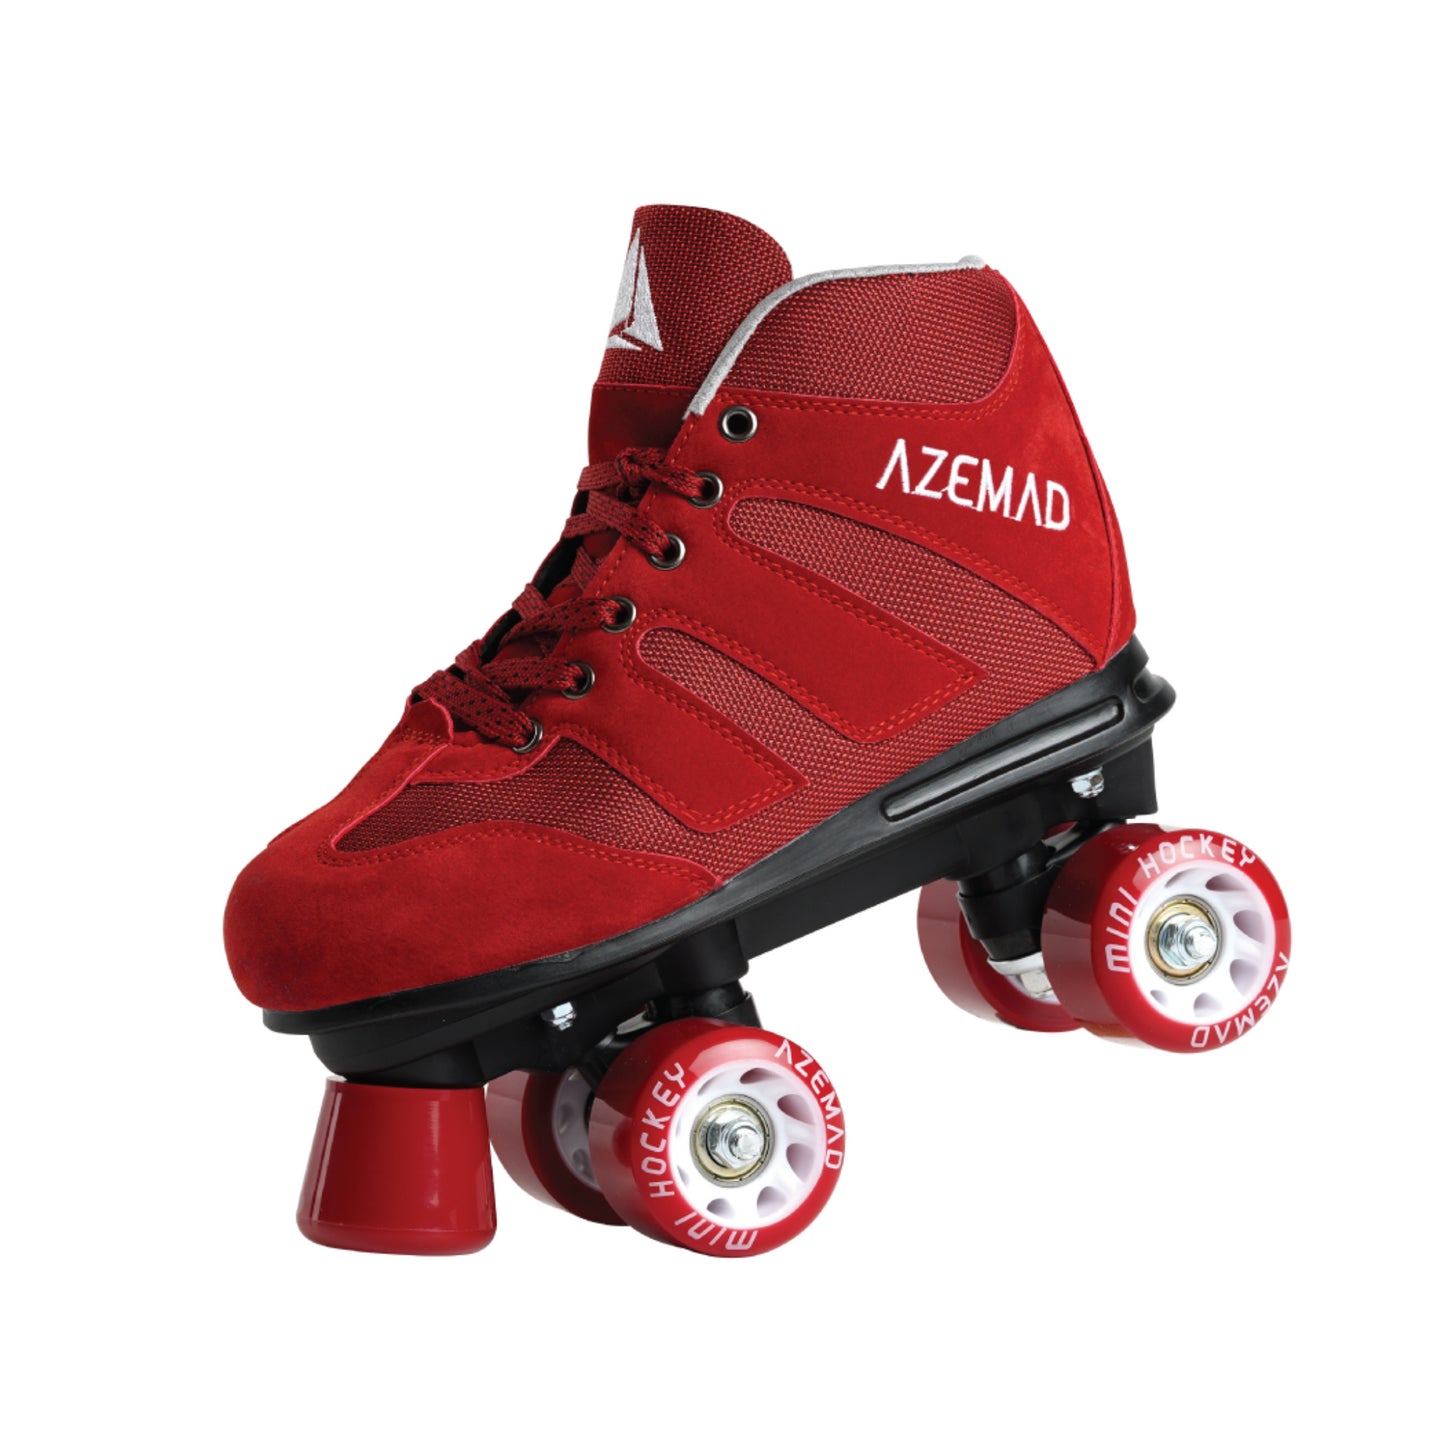 AZEMAD Patines Completos ECLIPSE MINI